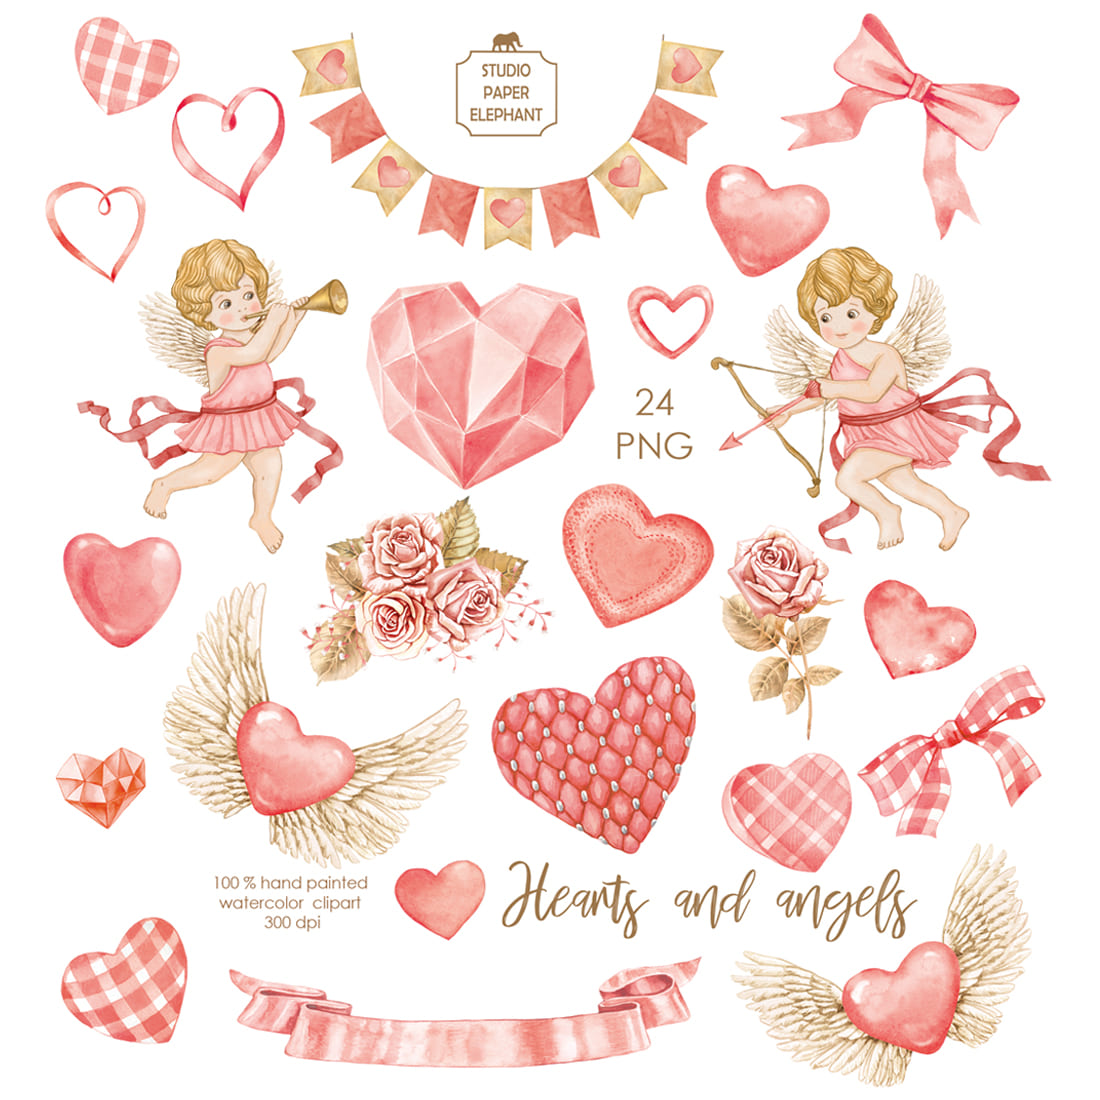 Watercolor Hearts and Angels Valentine's Day Clip art Valentine's Day Clipart Valentine's Day Postcard DIY Scrapbooking preview image.